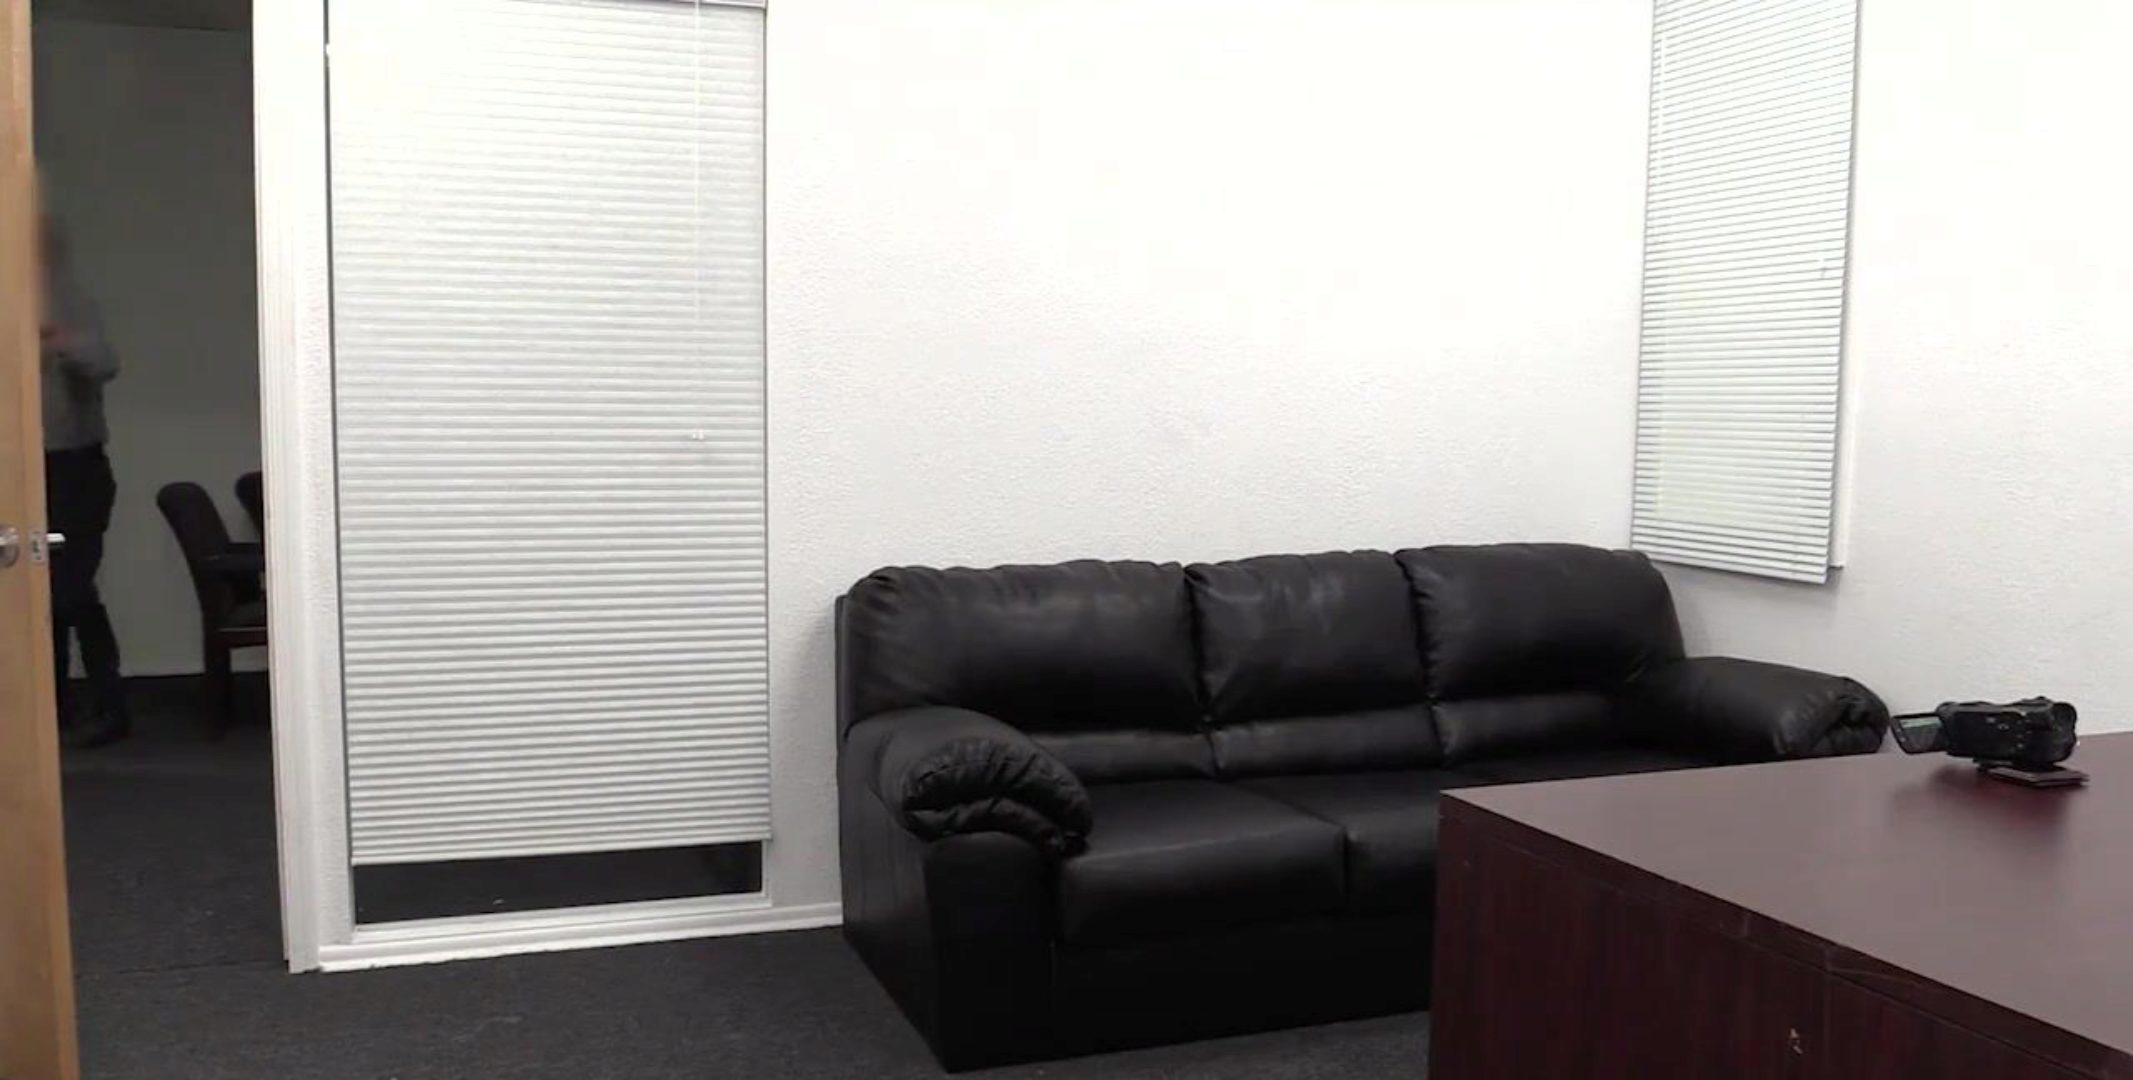 Backroom casting couch amie